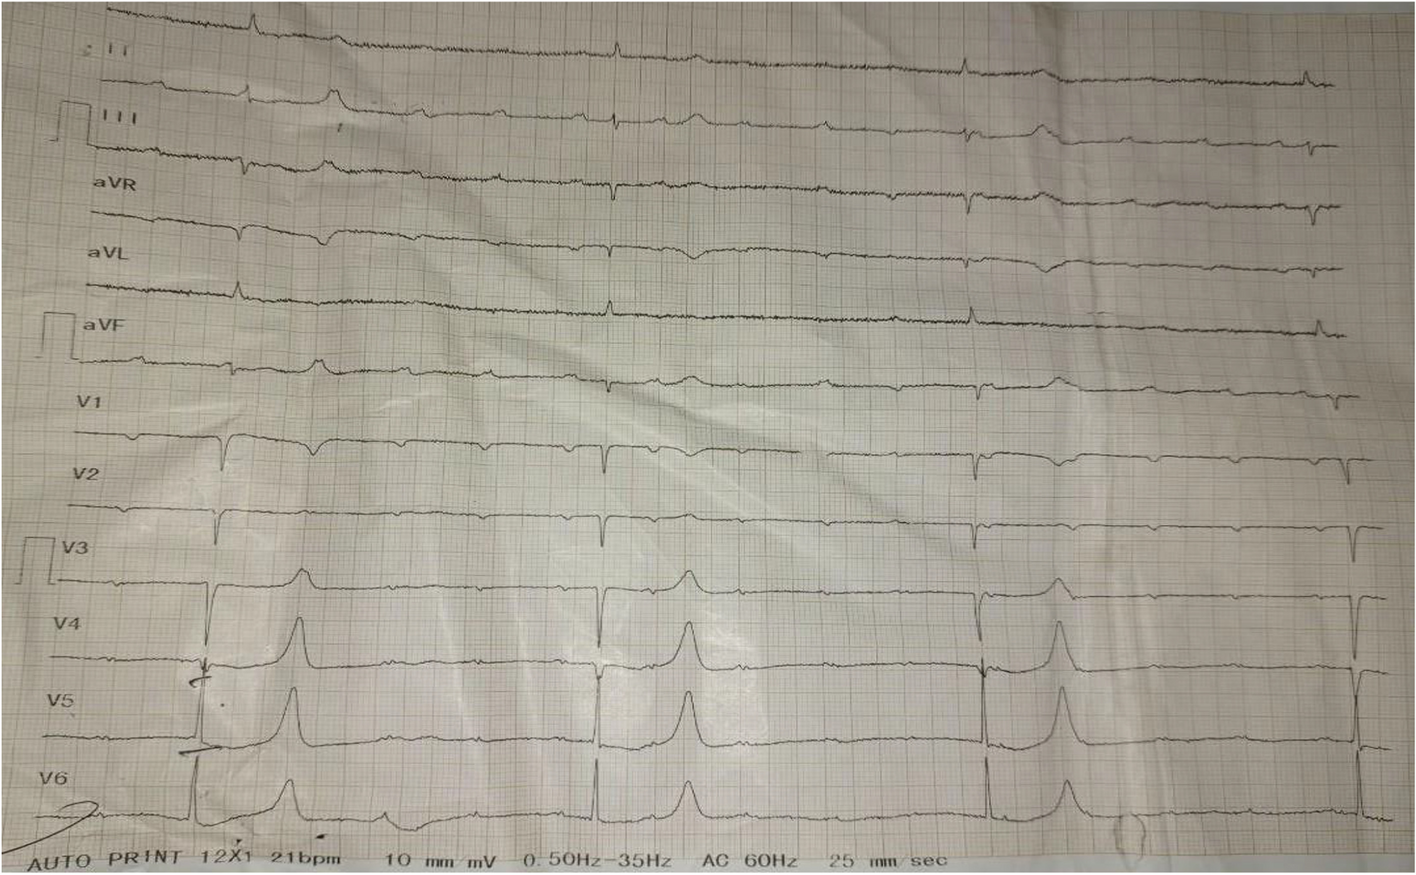 BRASH syndrome with a complete heart block- a case report